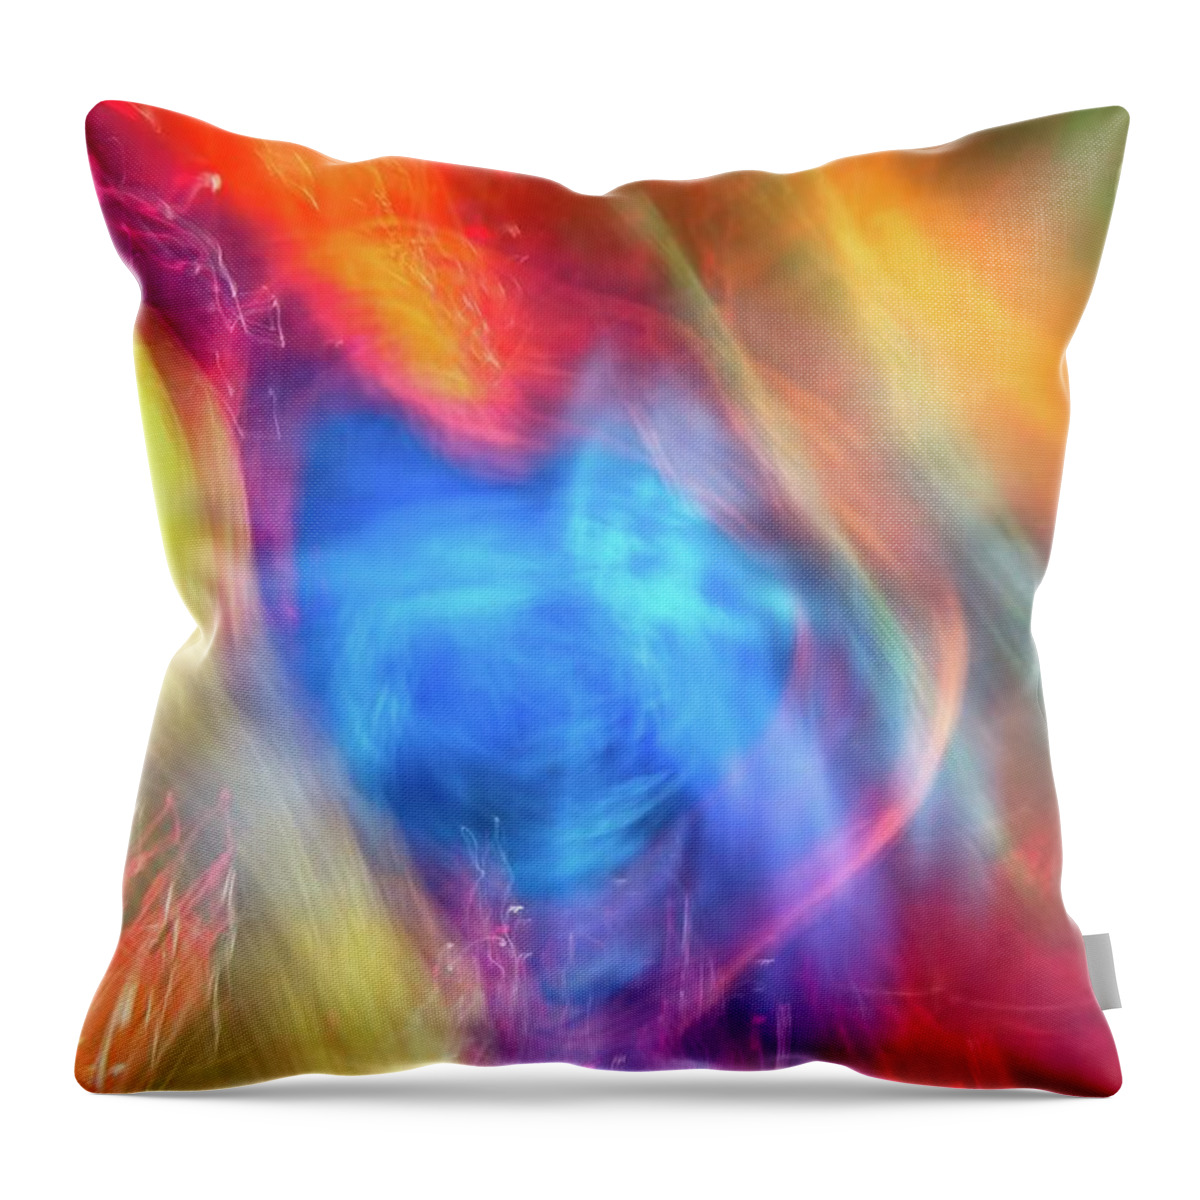 Background Throw Pillow featuring the photograph Abstract 61 by Steve DaPonte